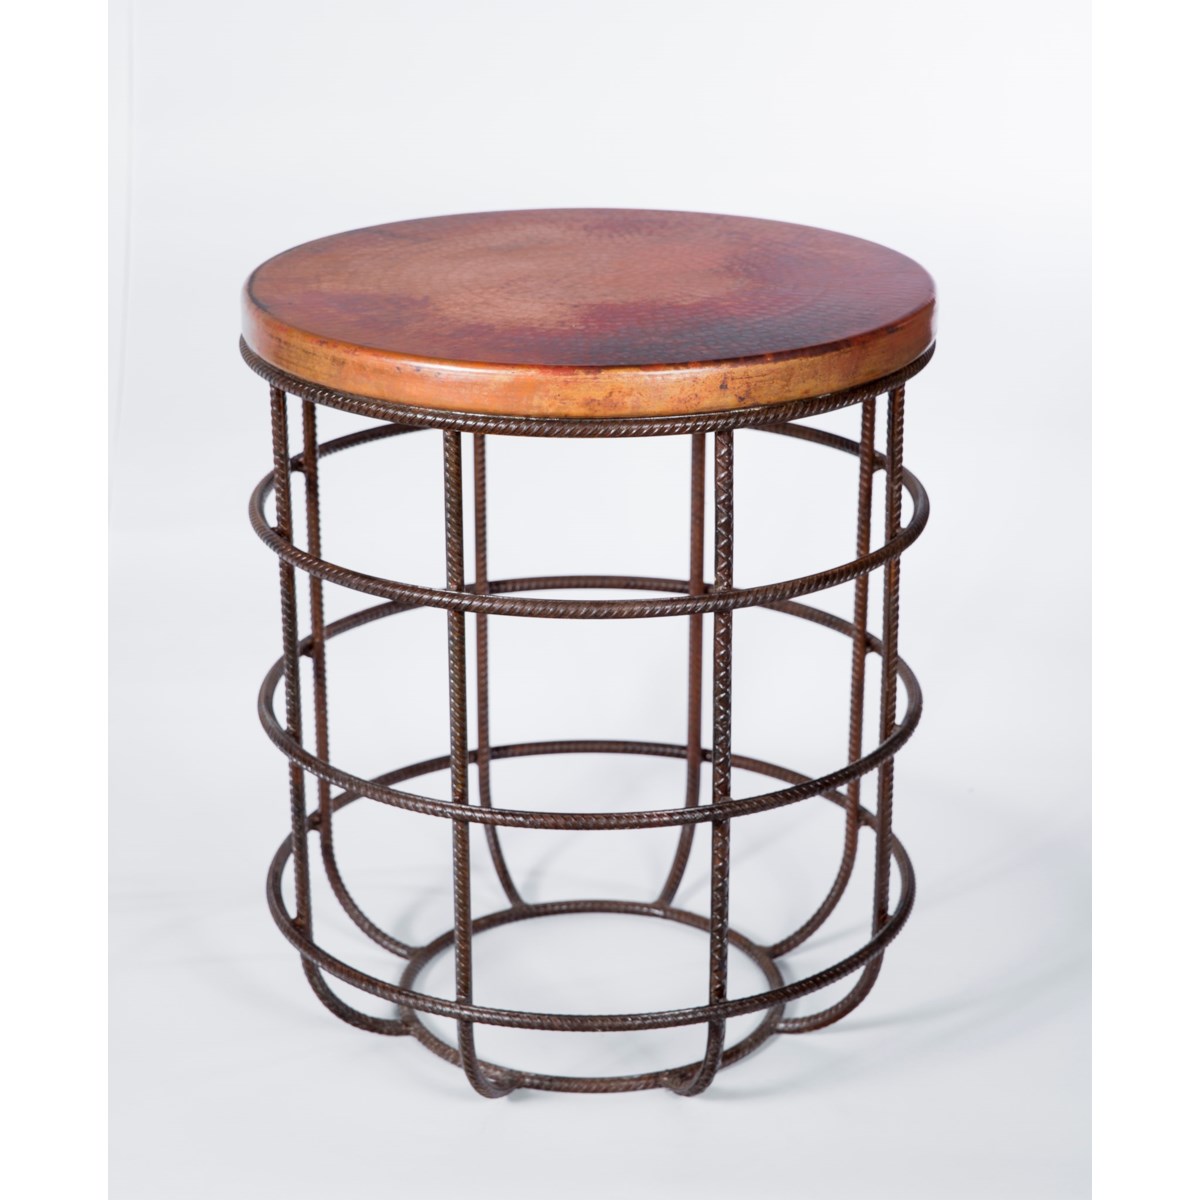 Axel Side Table in Rebar with Round Hammered Copper Top